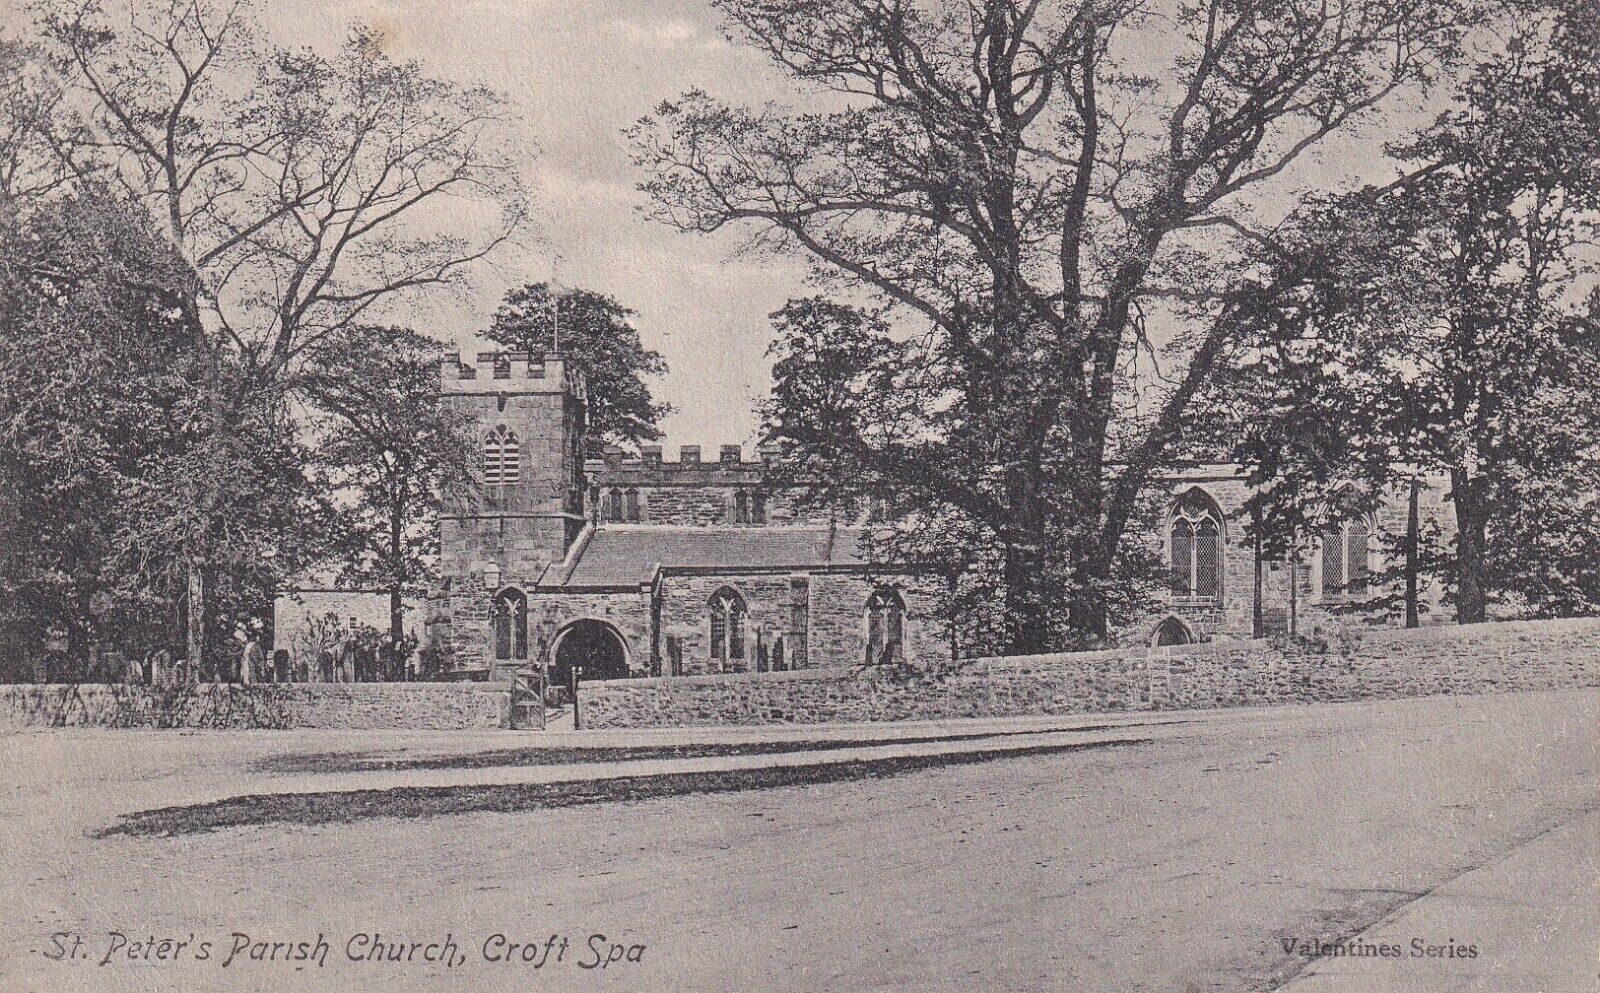 House Clearance - 1906 PC ST PETER'S CHURCH, CROFT SPA , LEWIS CAROLL'S FATHER WAS RECTOR 1843-68 